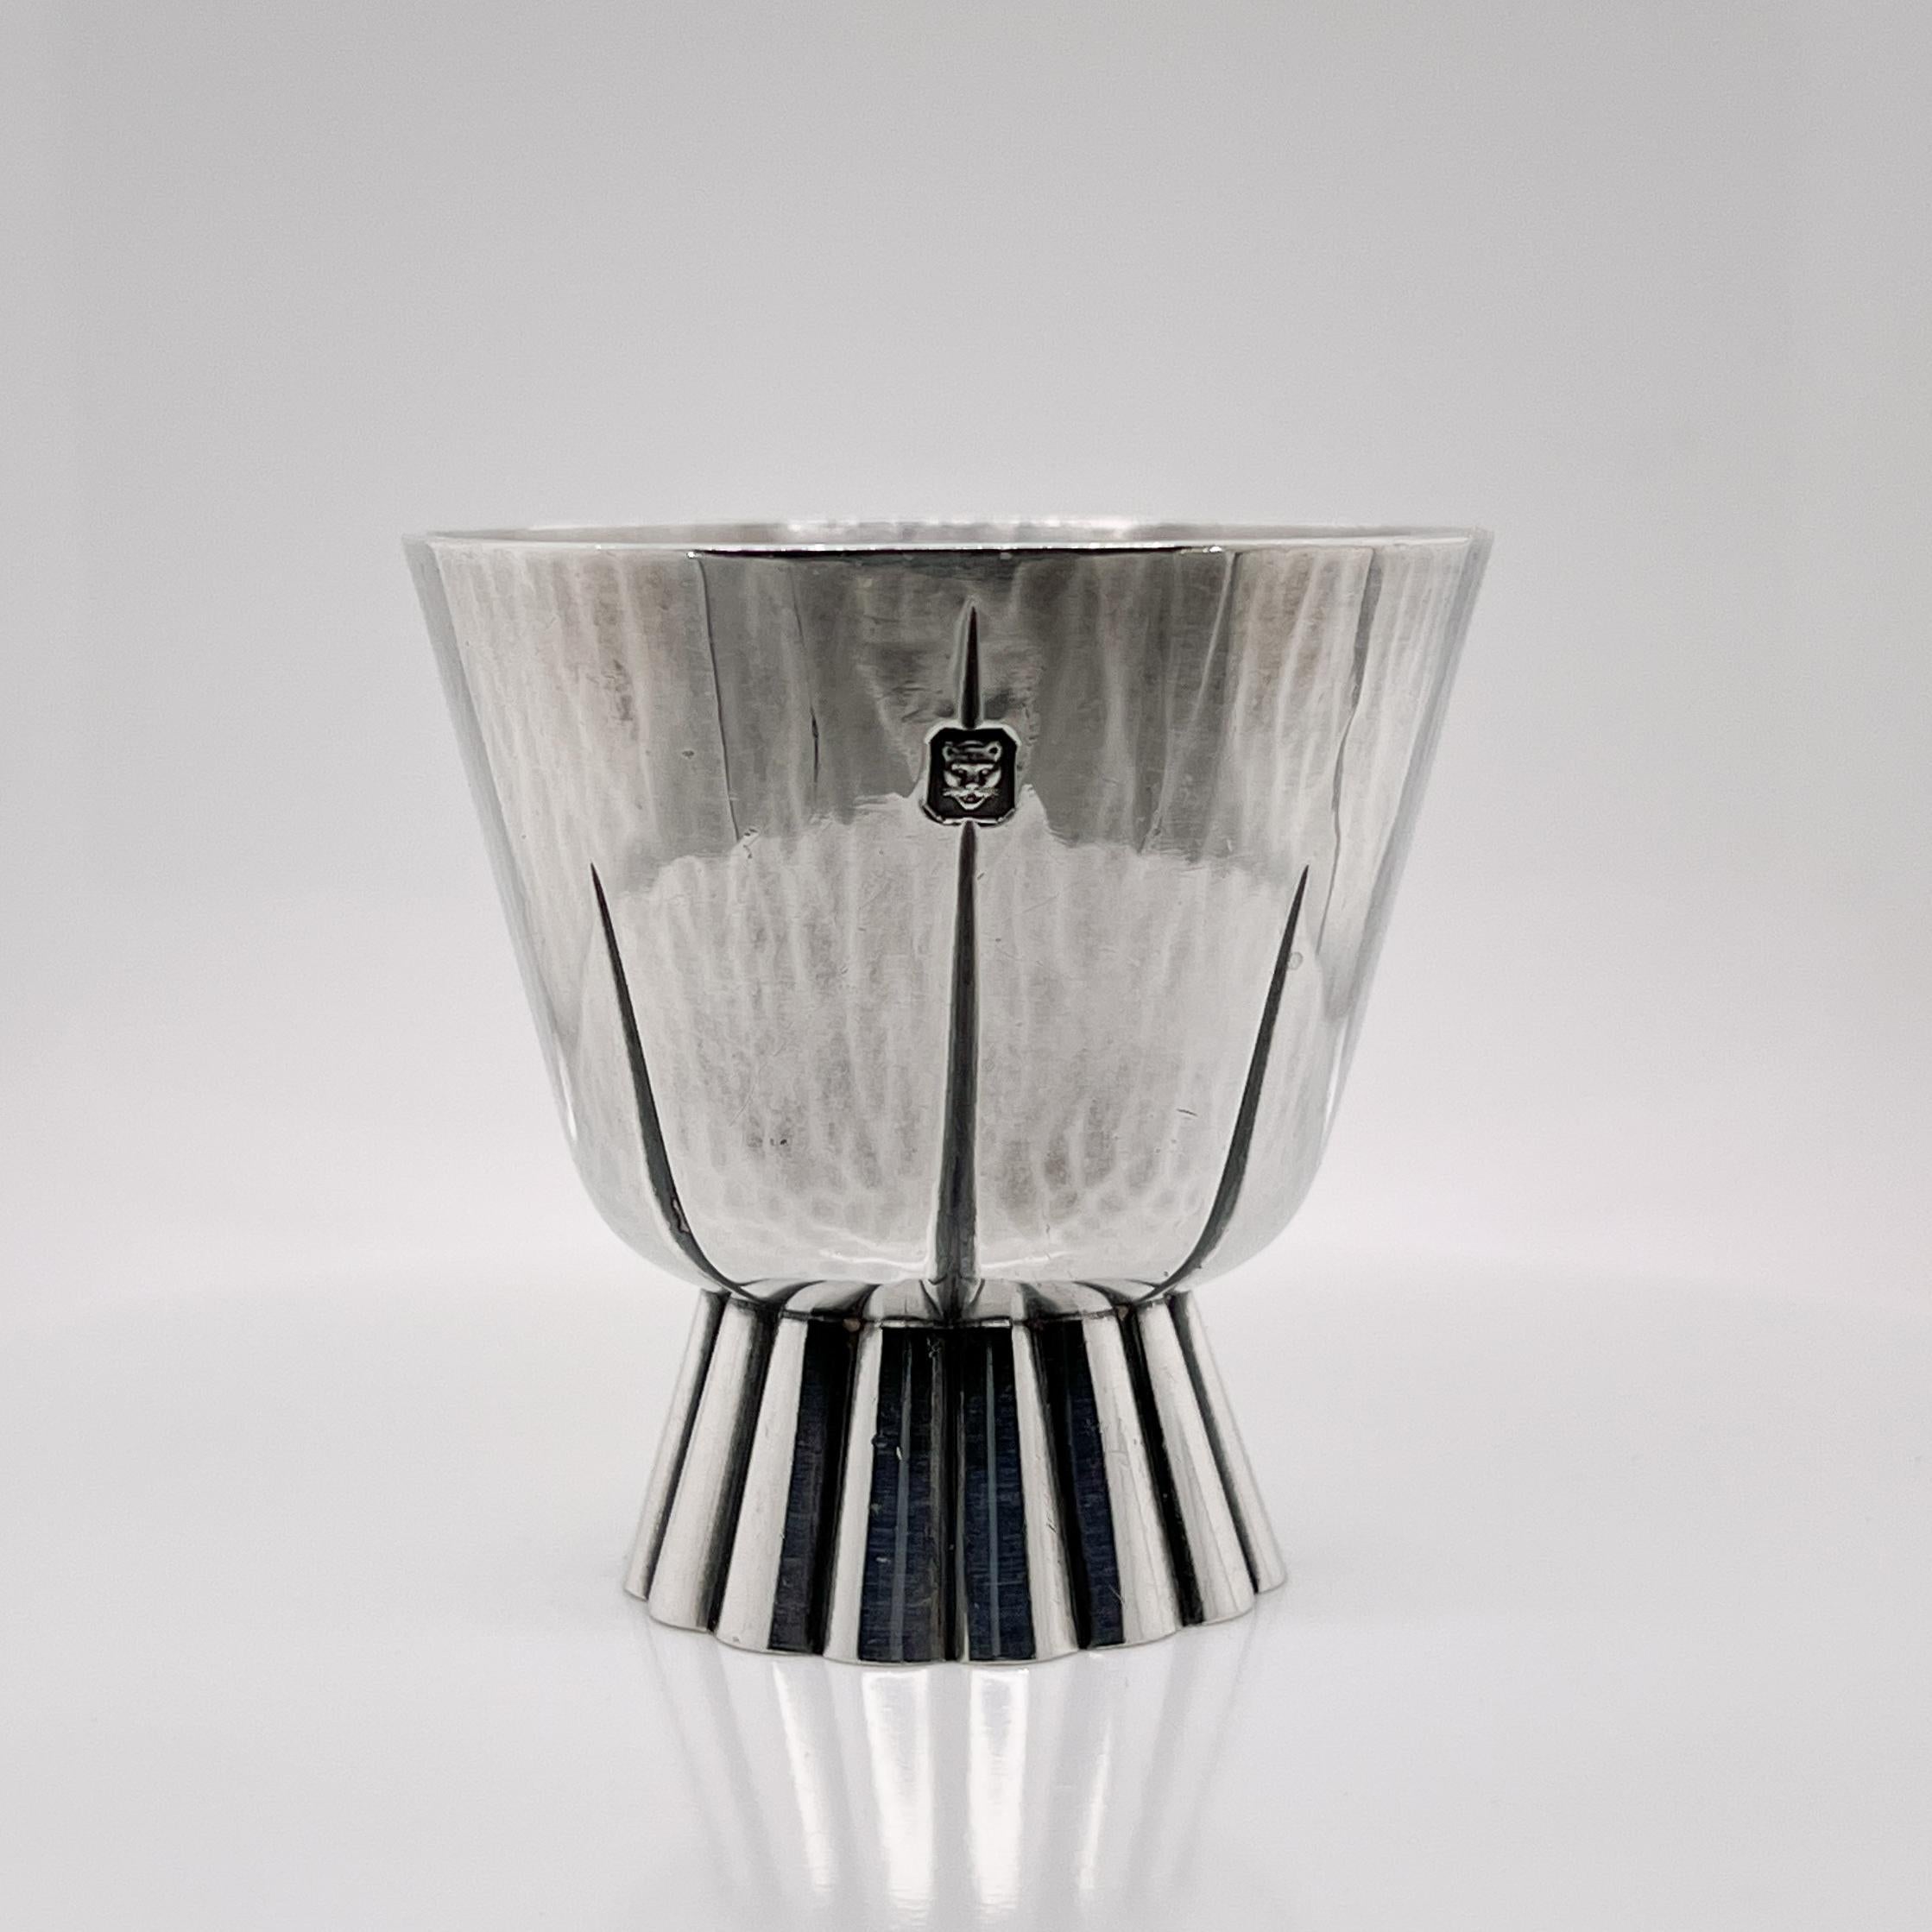 Early English Modernist Gerald Benney Sterling Silver Cordial Cup or Shot Glass For Sale 2